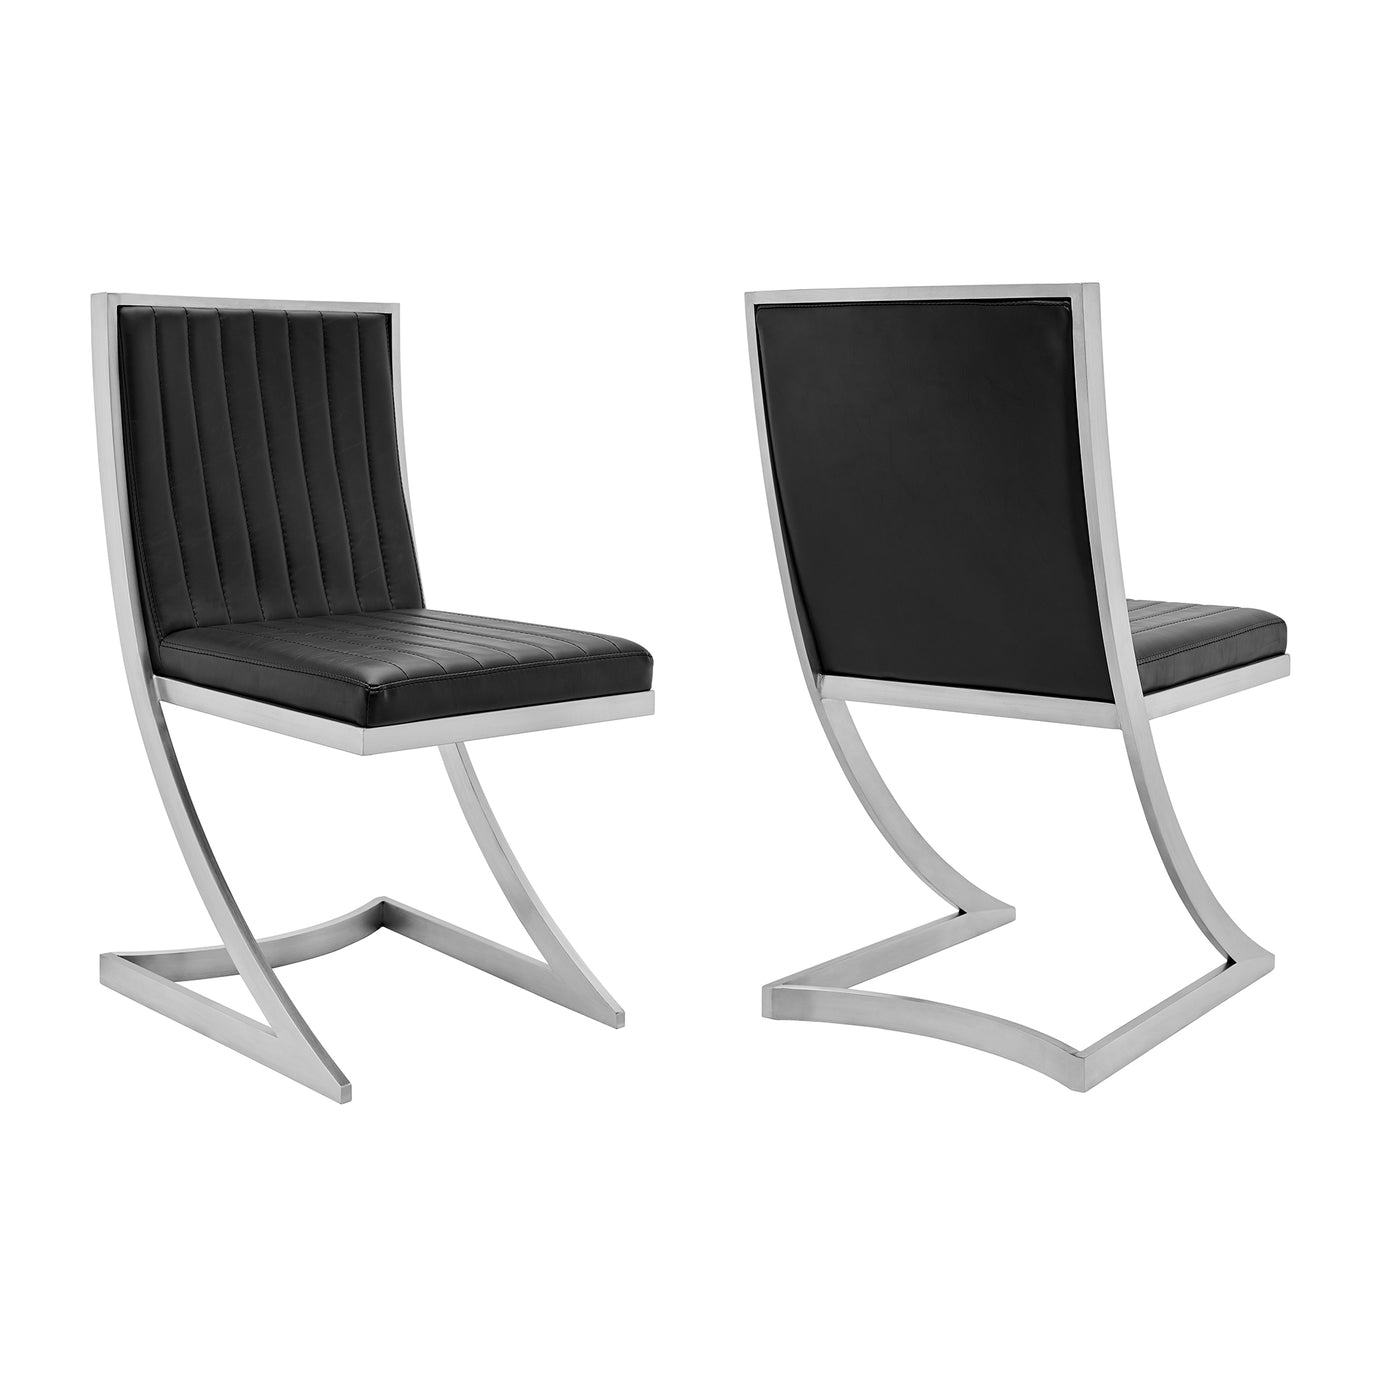 Marc Dining Chair Set of 2